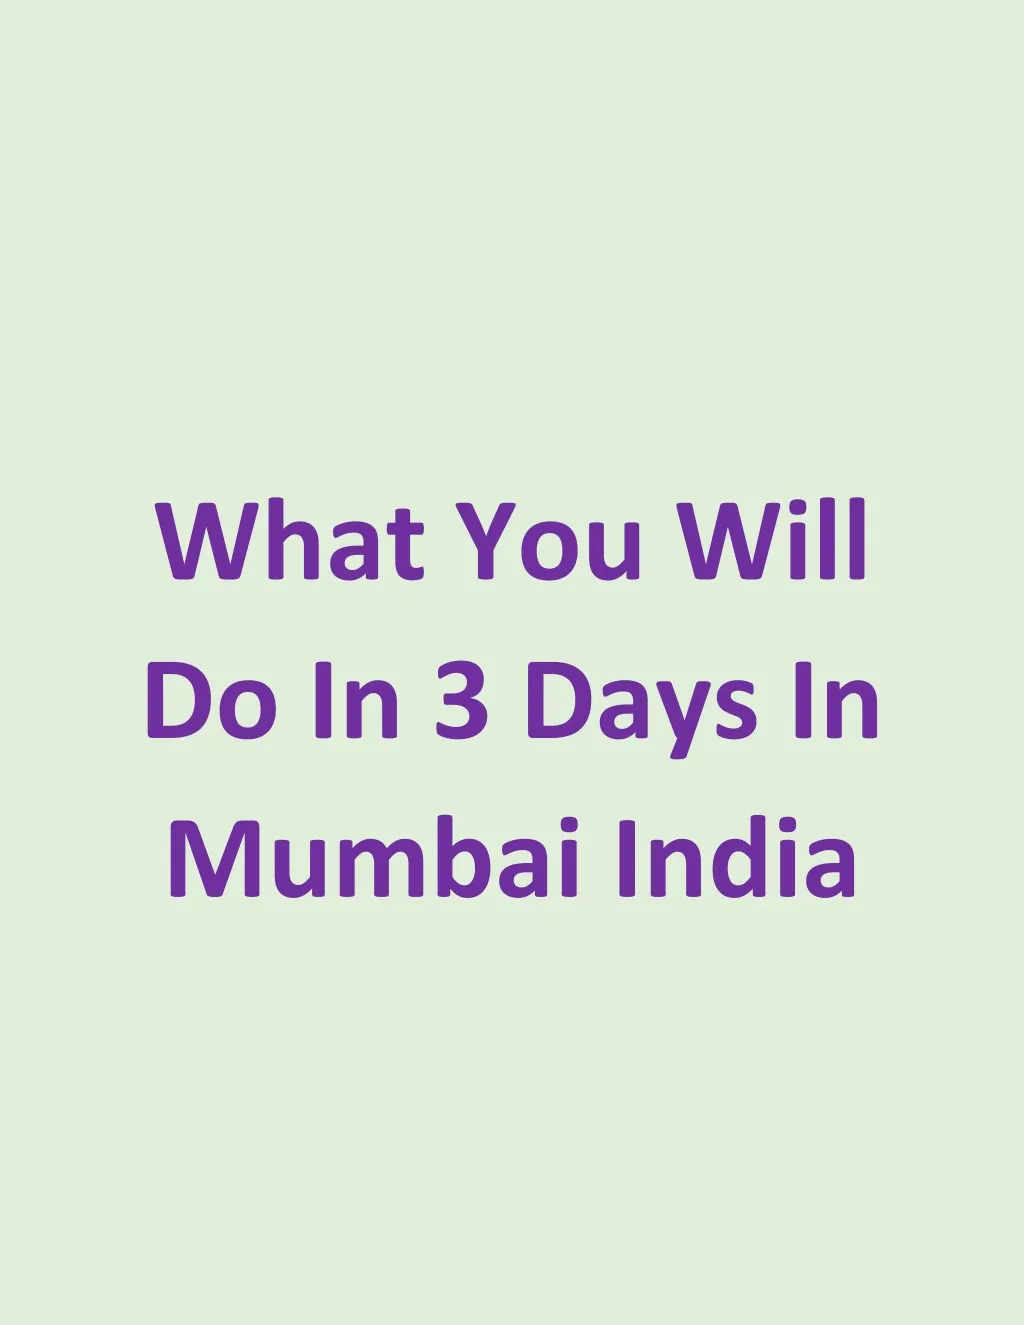 what you will do in 3 days in mumbai india